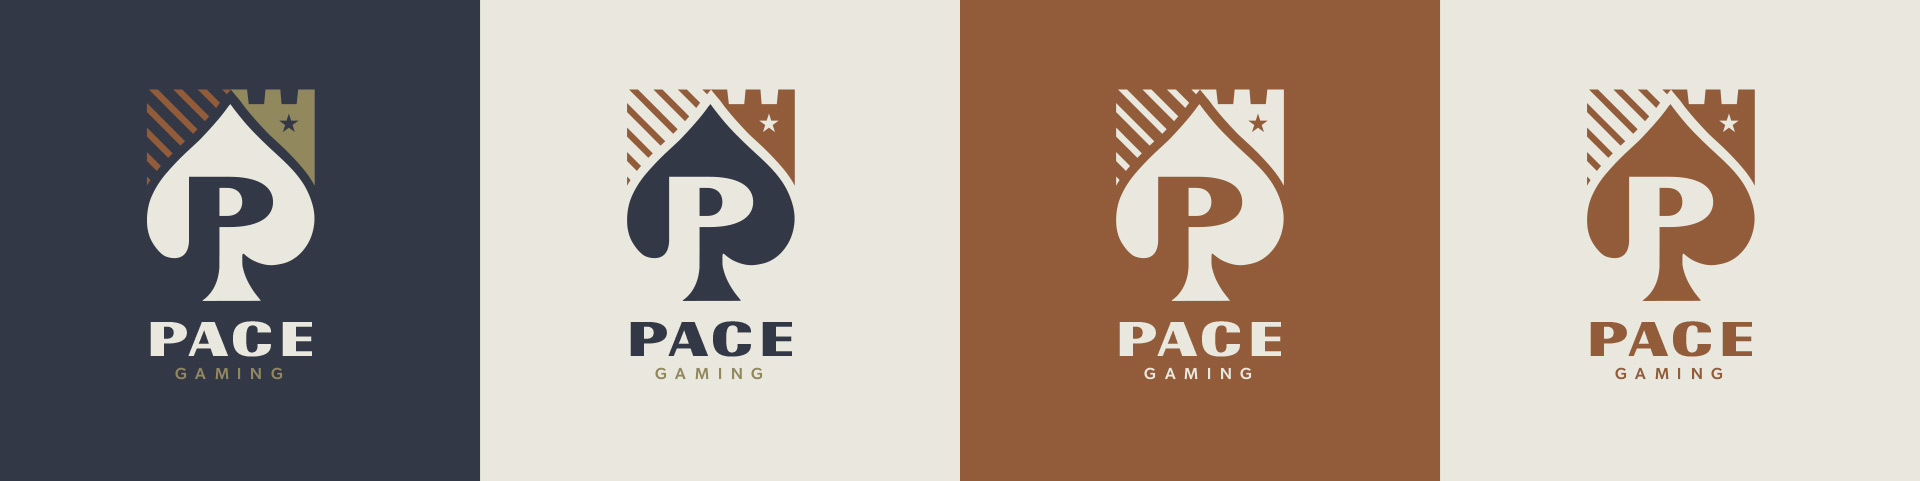 PACE Gaming